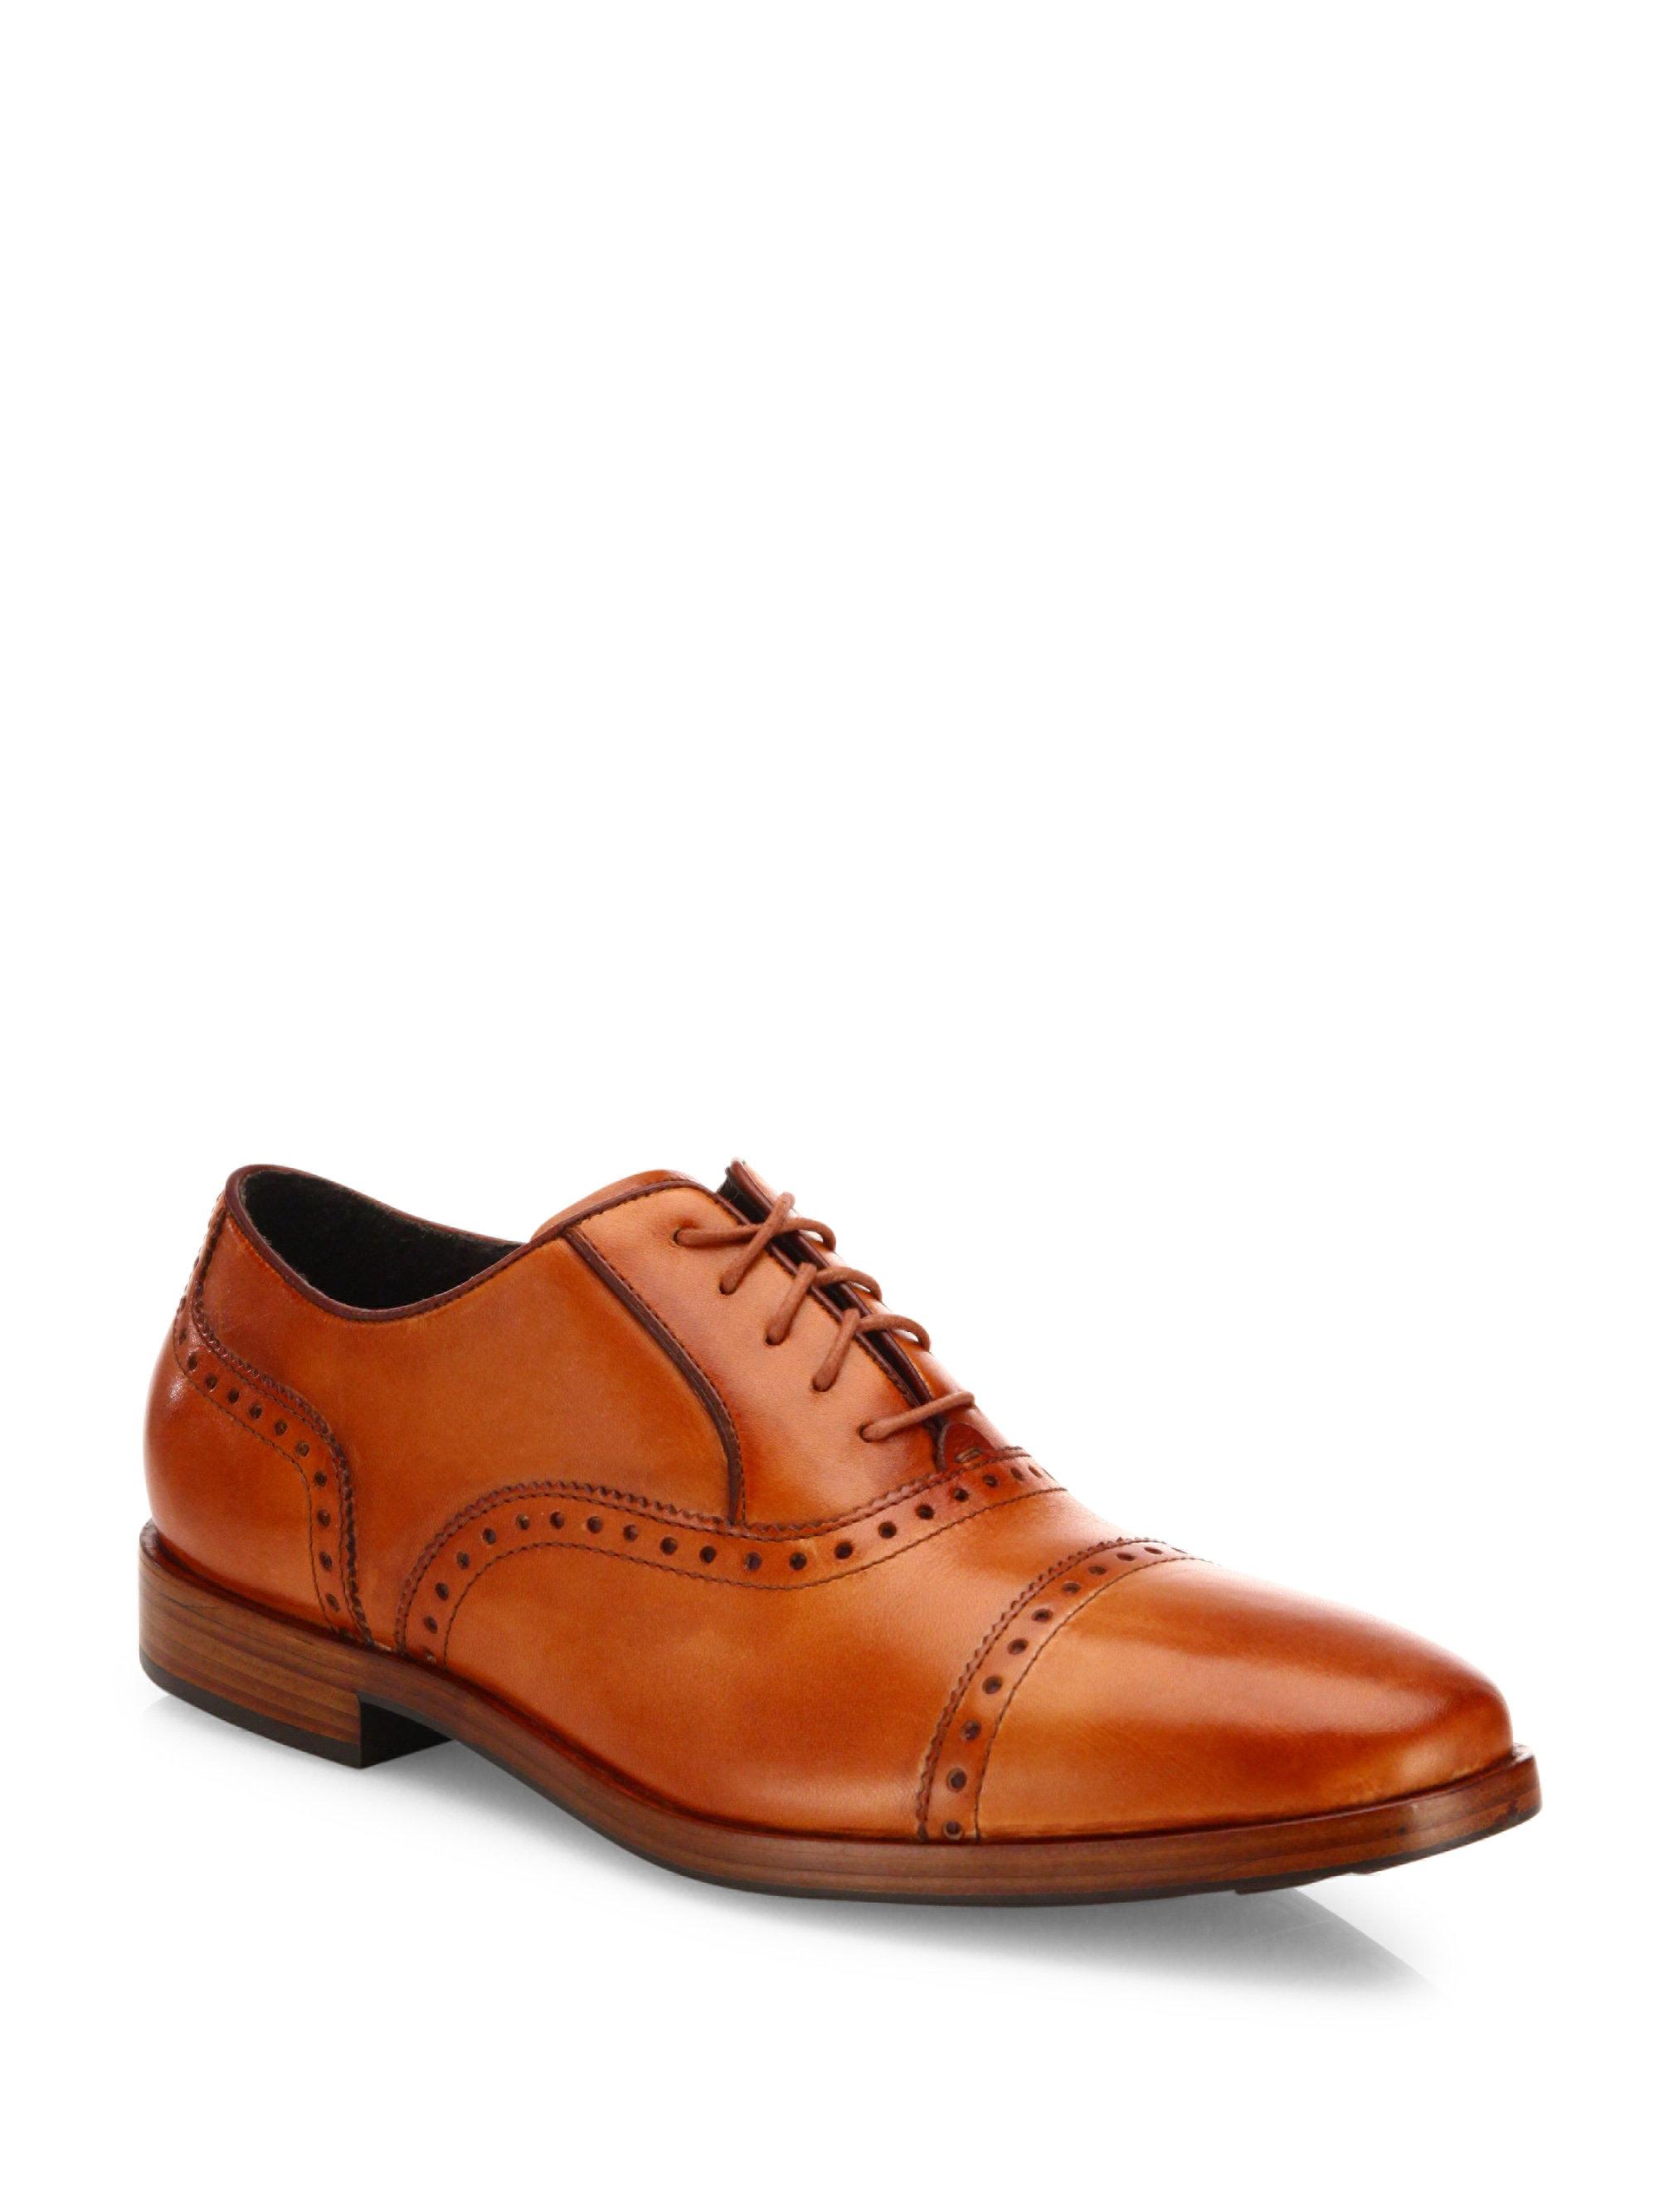 Lyst - Cole Haan Brogue Leather Oxfords in Brown for Men